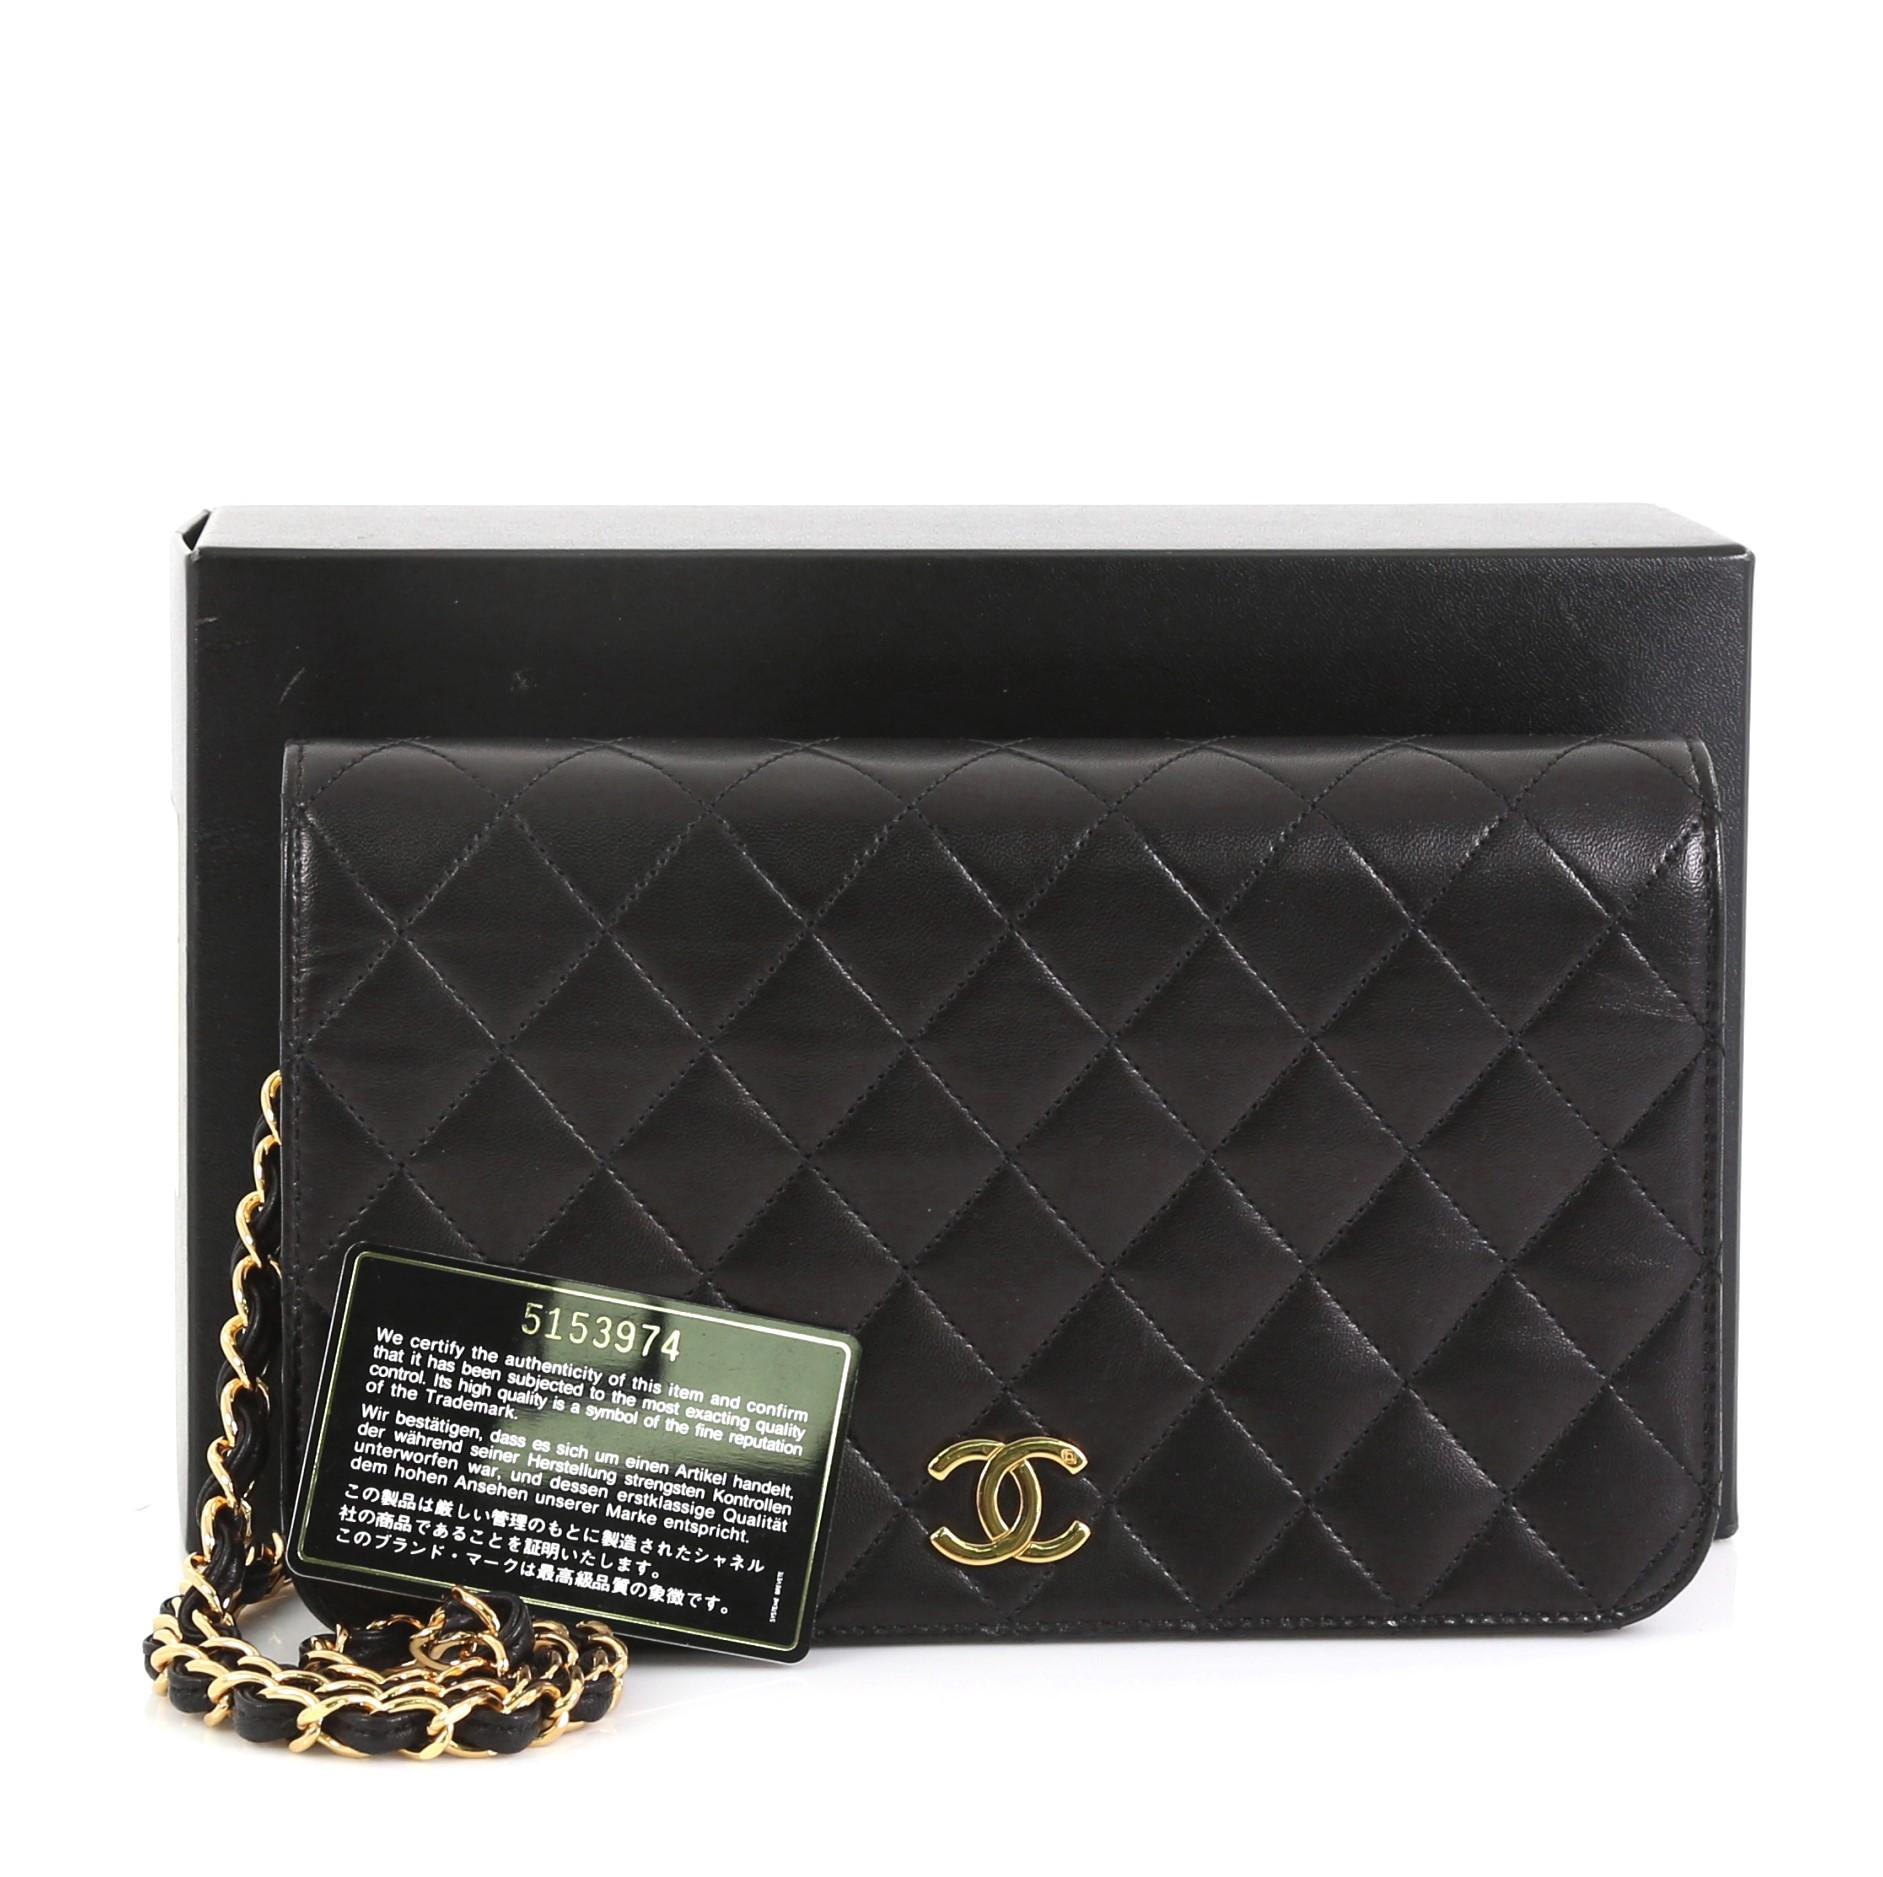 This Chanel Vintage Full Flap Bag Quilted Lambskin Small, crafted in black quilted lambskin leather, features woven-in leather chain link strap and gold-tone hardware. Its CC turn-lock closure opens to a red leather interior with zip pocket.